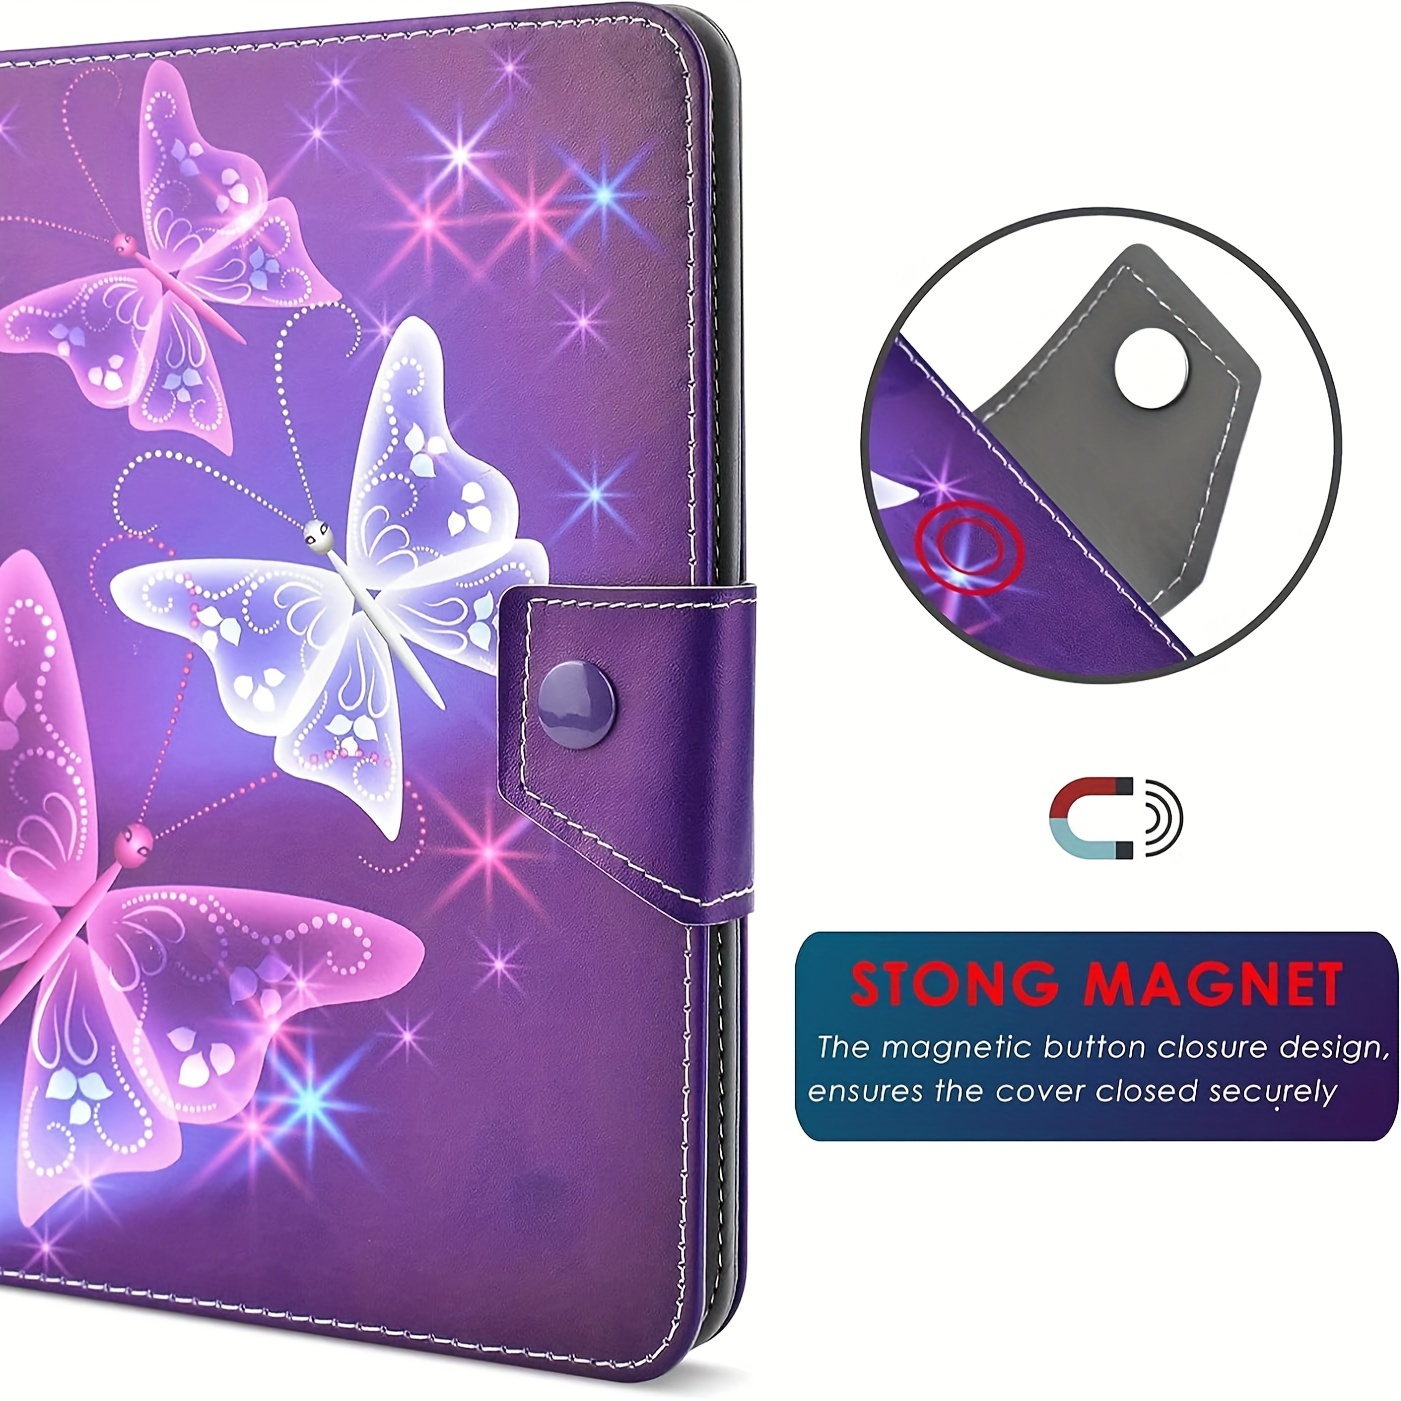 

Universal 10.1" Tablet Folio Case – Protective Leather Stand Cover With 4 Fixed Rings For 9.6-10.5" Android/ios/windows Tablets, Secure Magnetic Closure, Portable Travel Design, Purple Butterfly